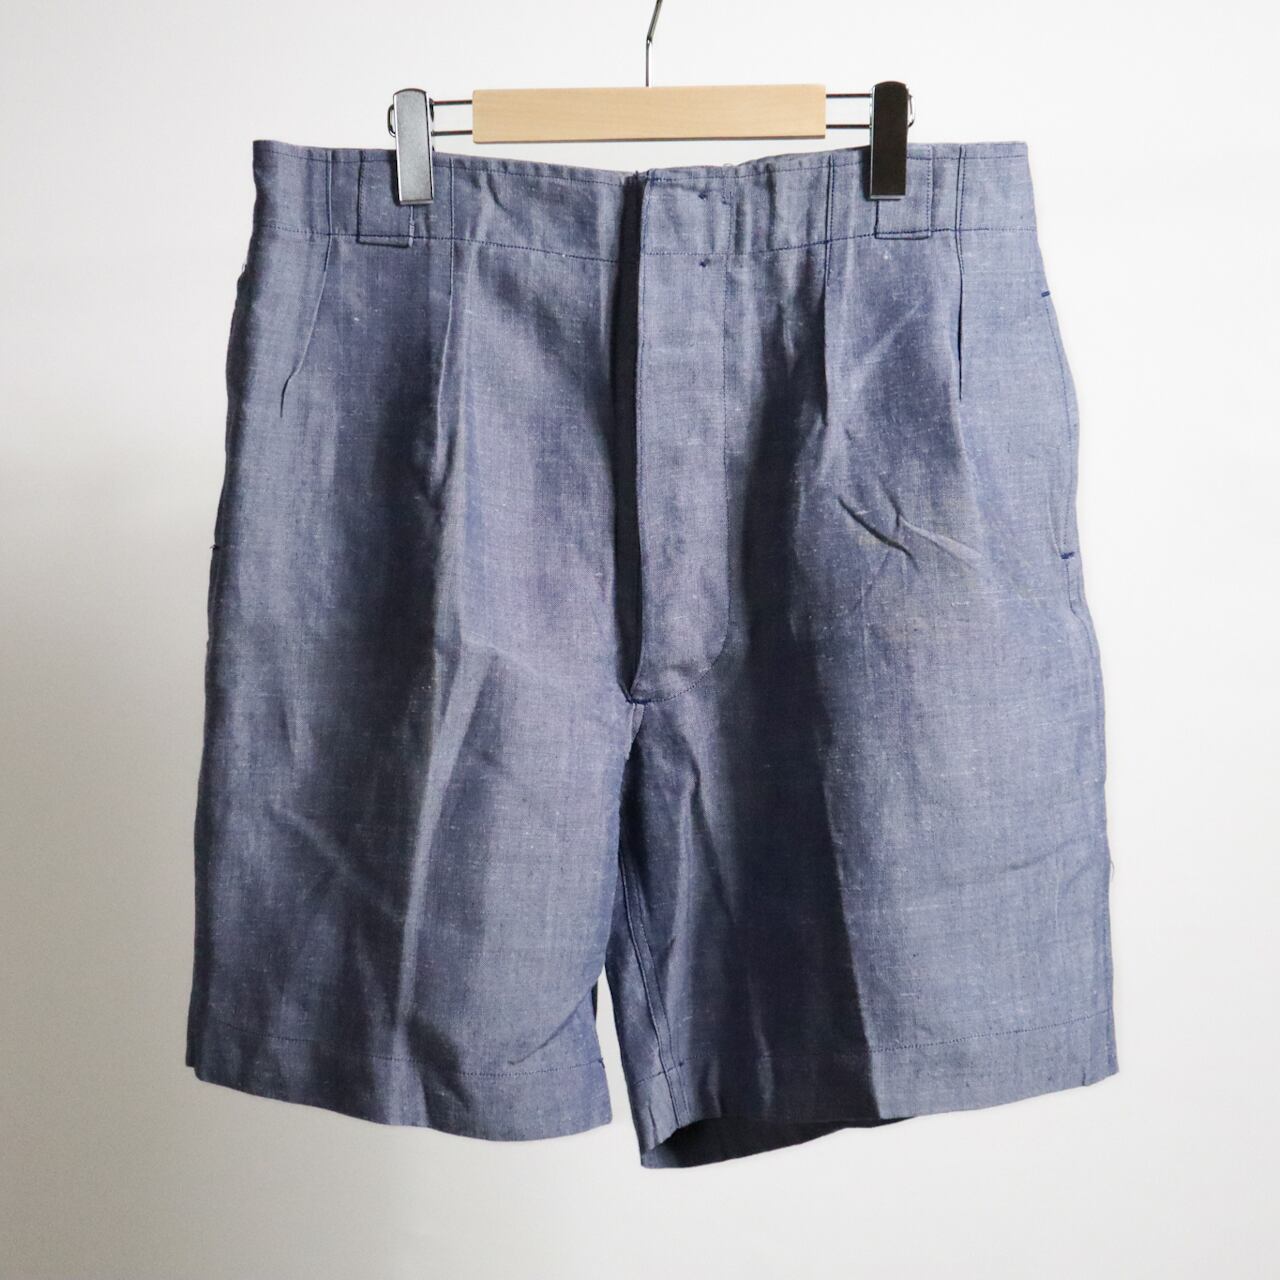 DEADSTOCK】50s FRENCH NAVY LINEN SHORTS フランス軍 海軍 リネン